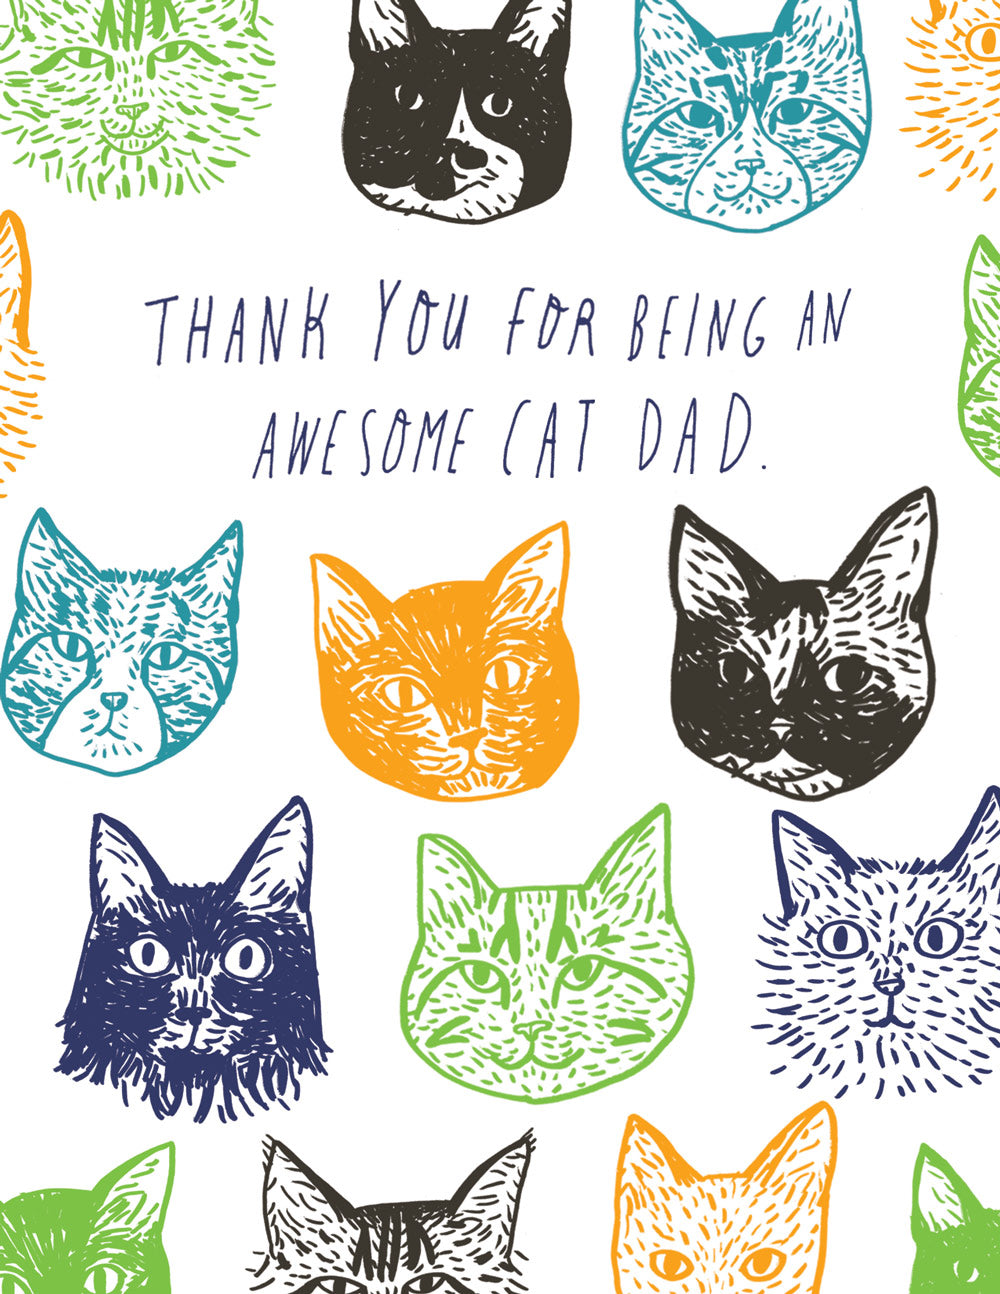 Cat Dad Fathers Day Card Printable